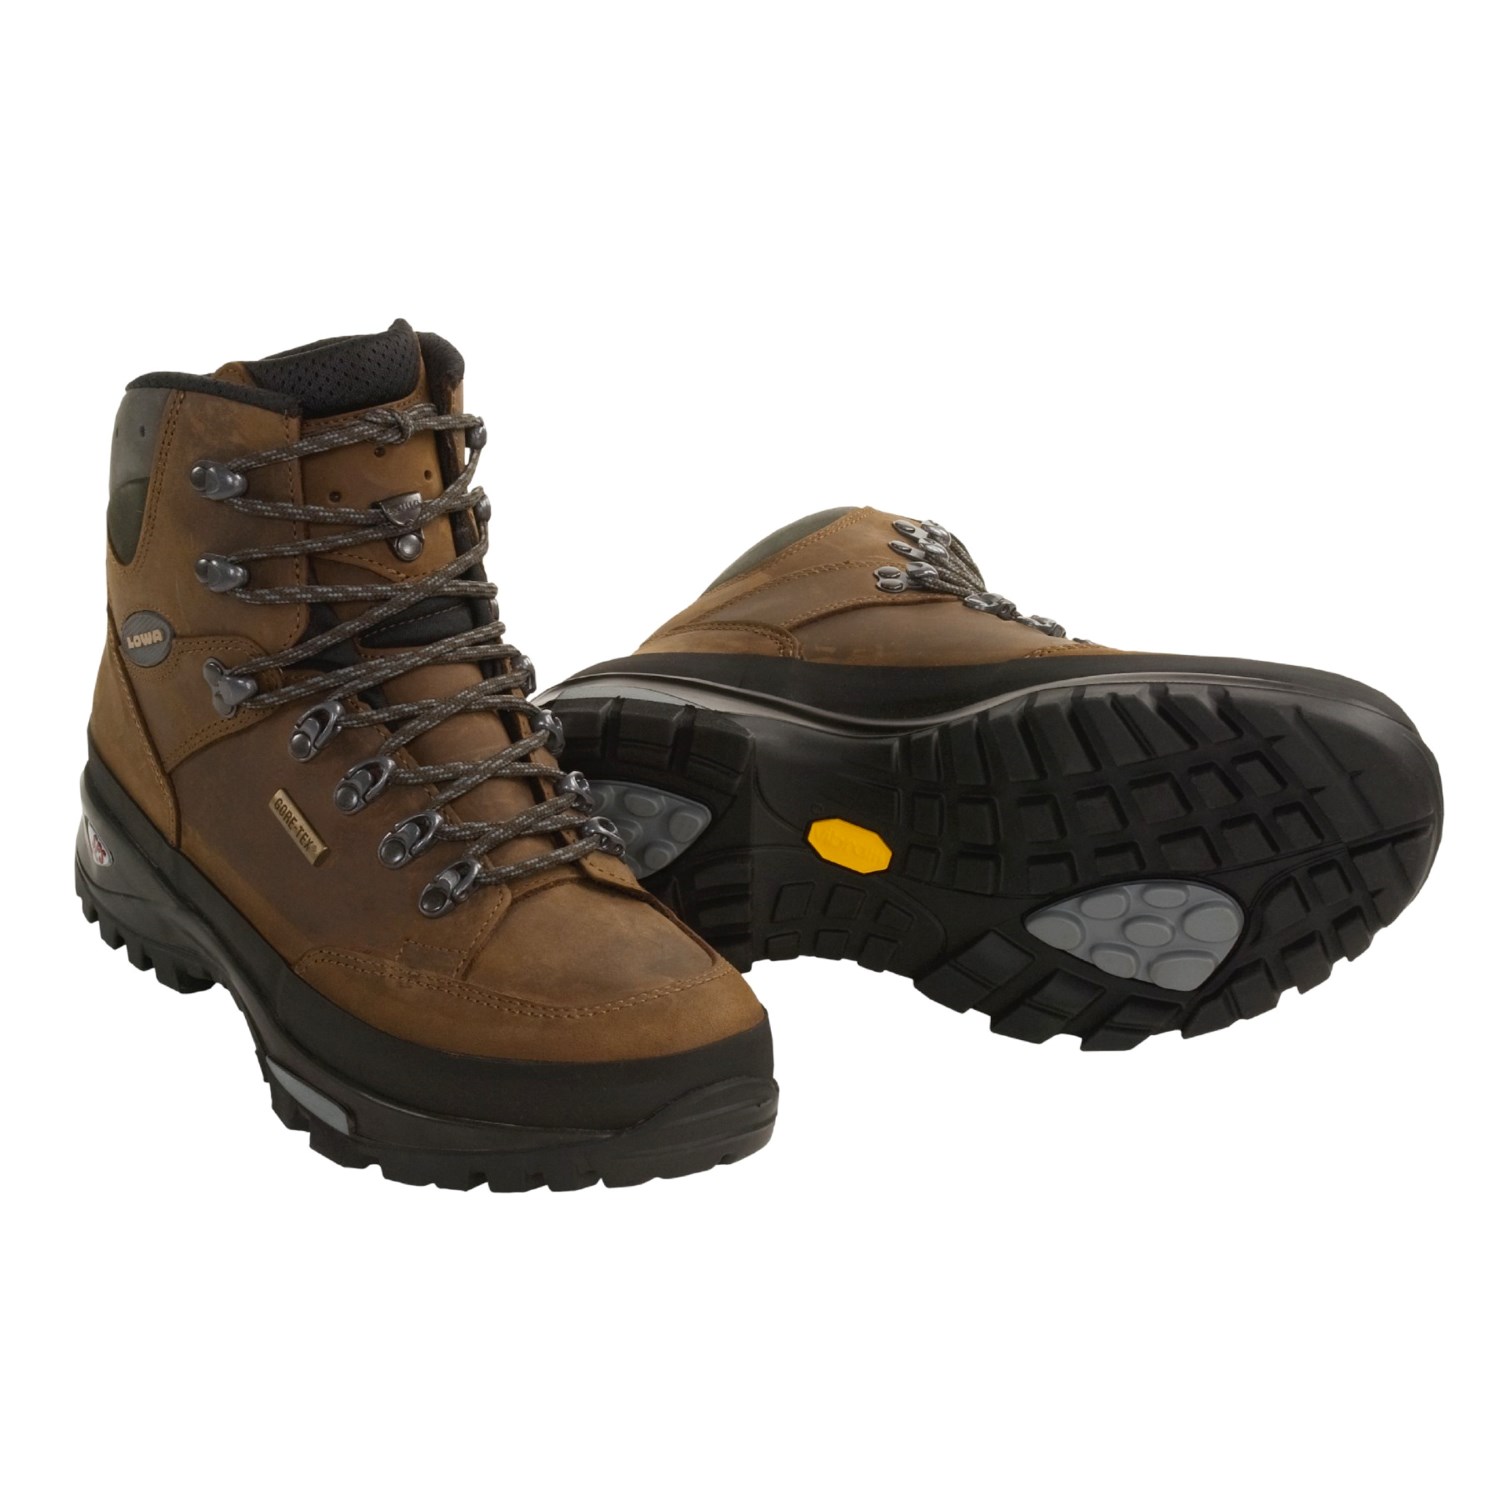 Lowa Treviso Gore-Tex® Hiking Boots (For Men) 1686P - Save 36%